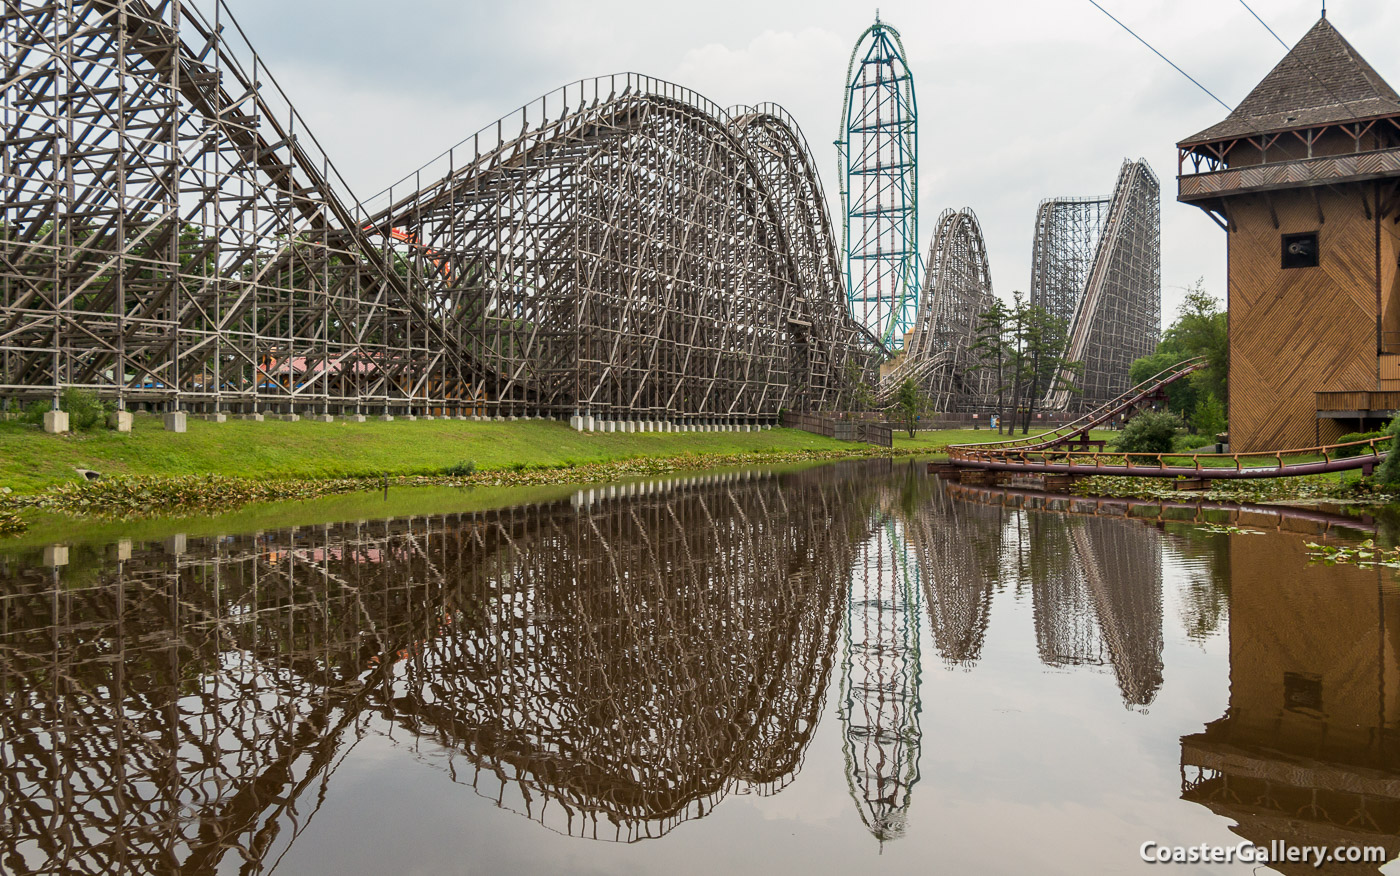 A newer picture of roller coaster from CoasterGallery.com